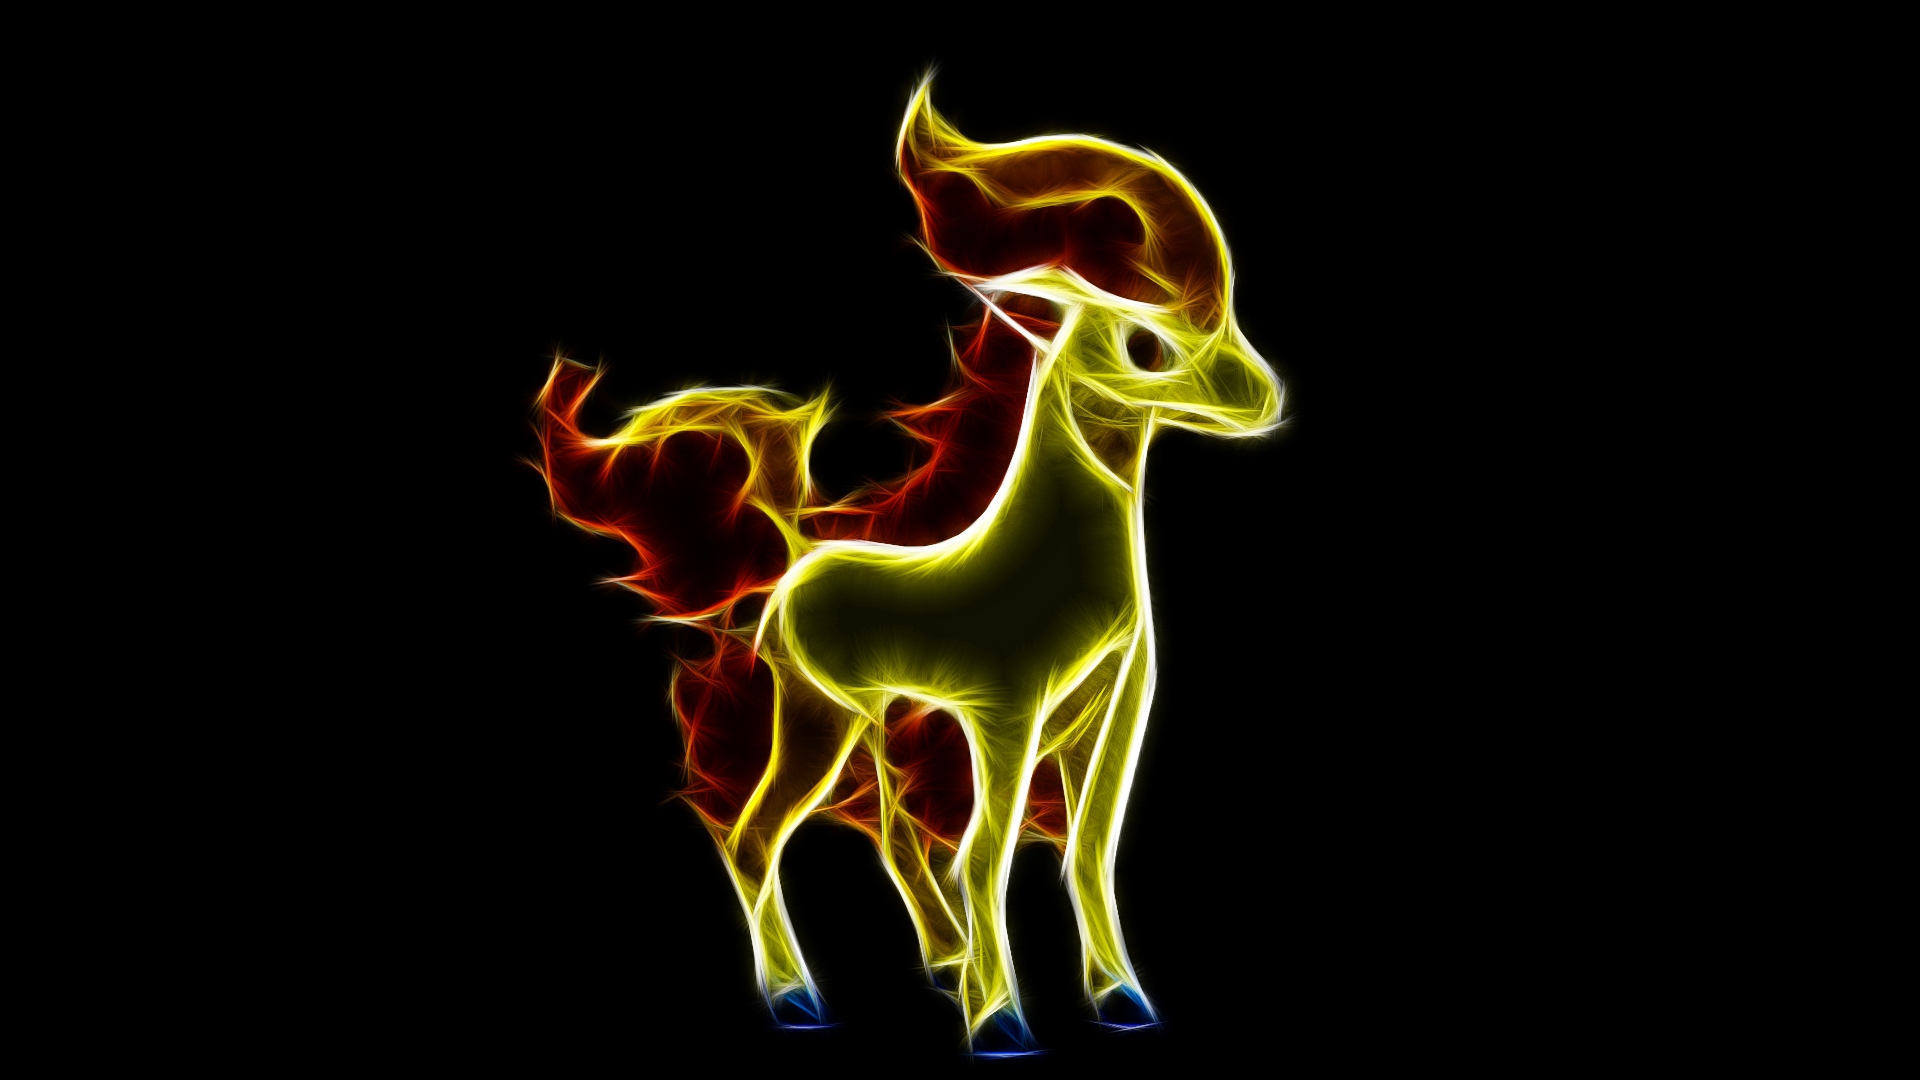 Ponyta Wallpaper HD Full Pictures